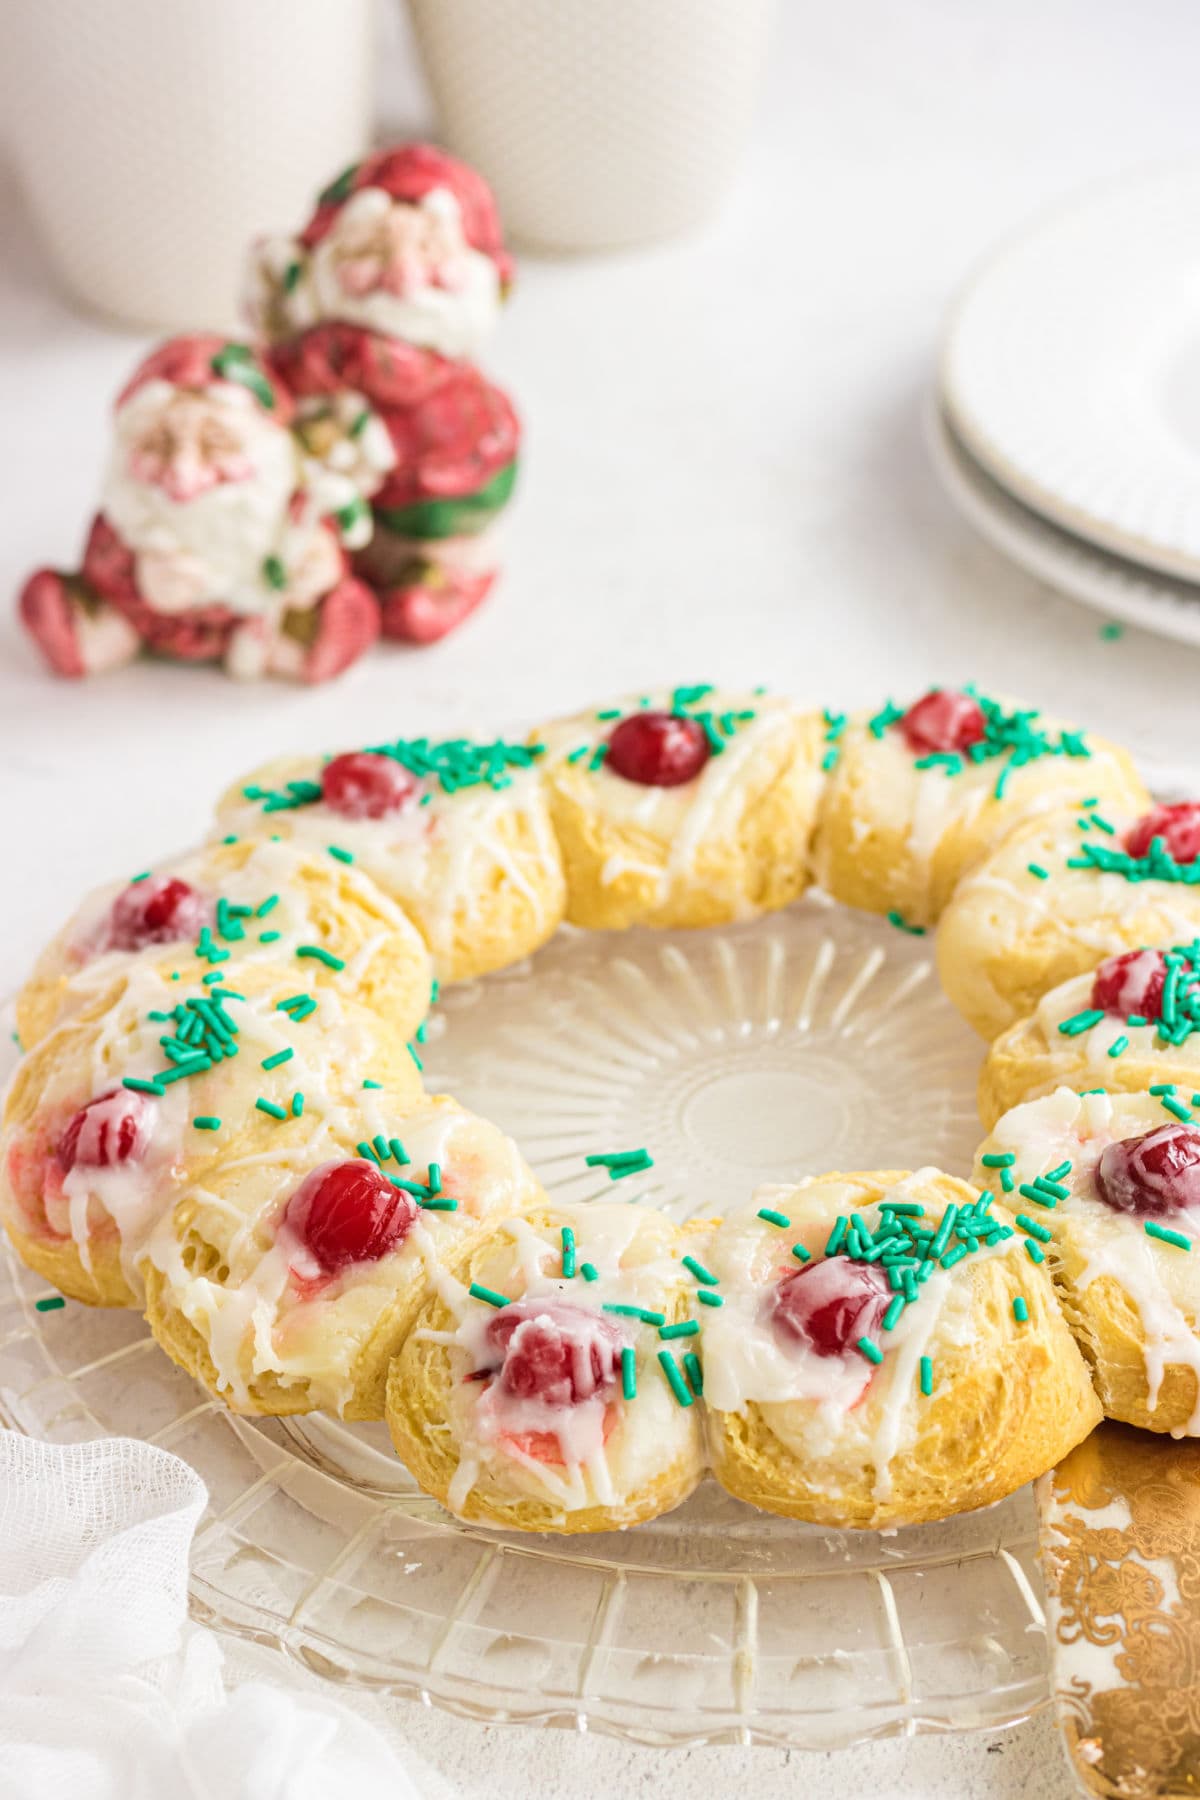 The sweet rolls formed into a wreath.